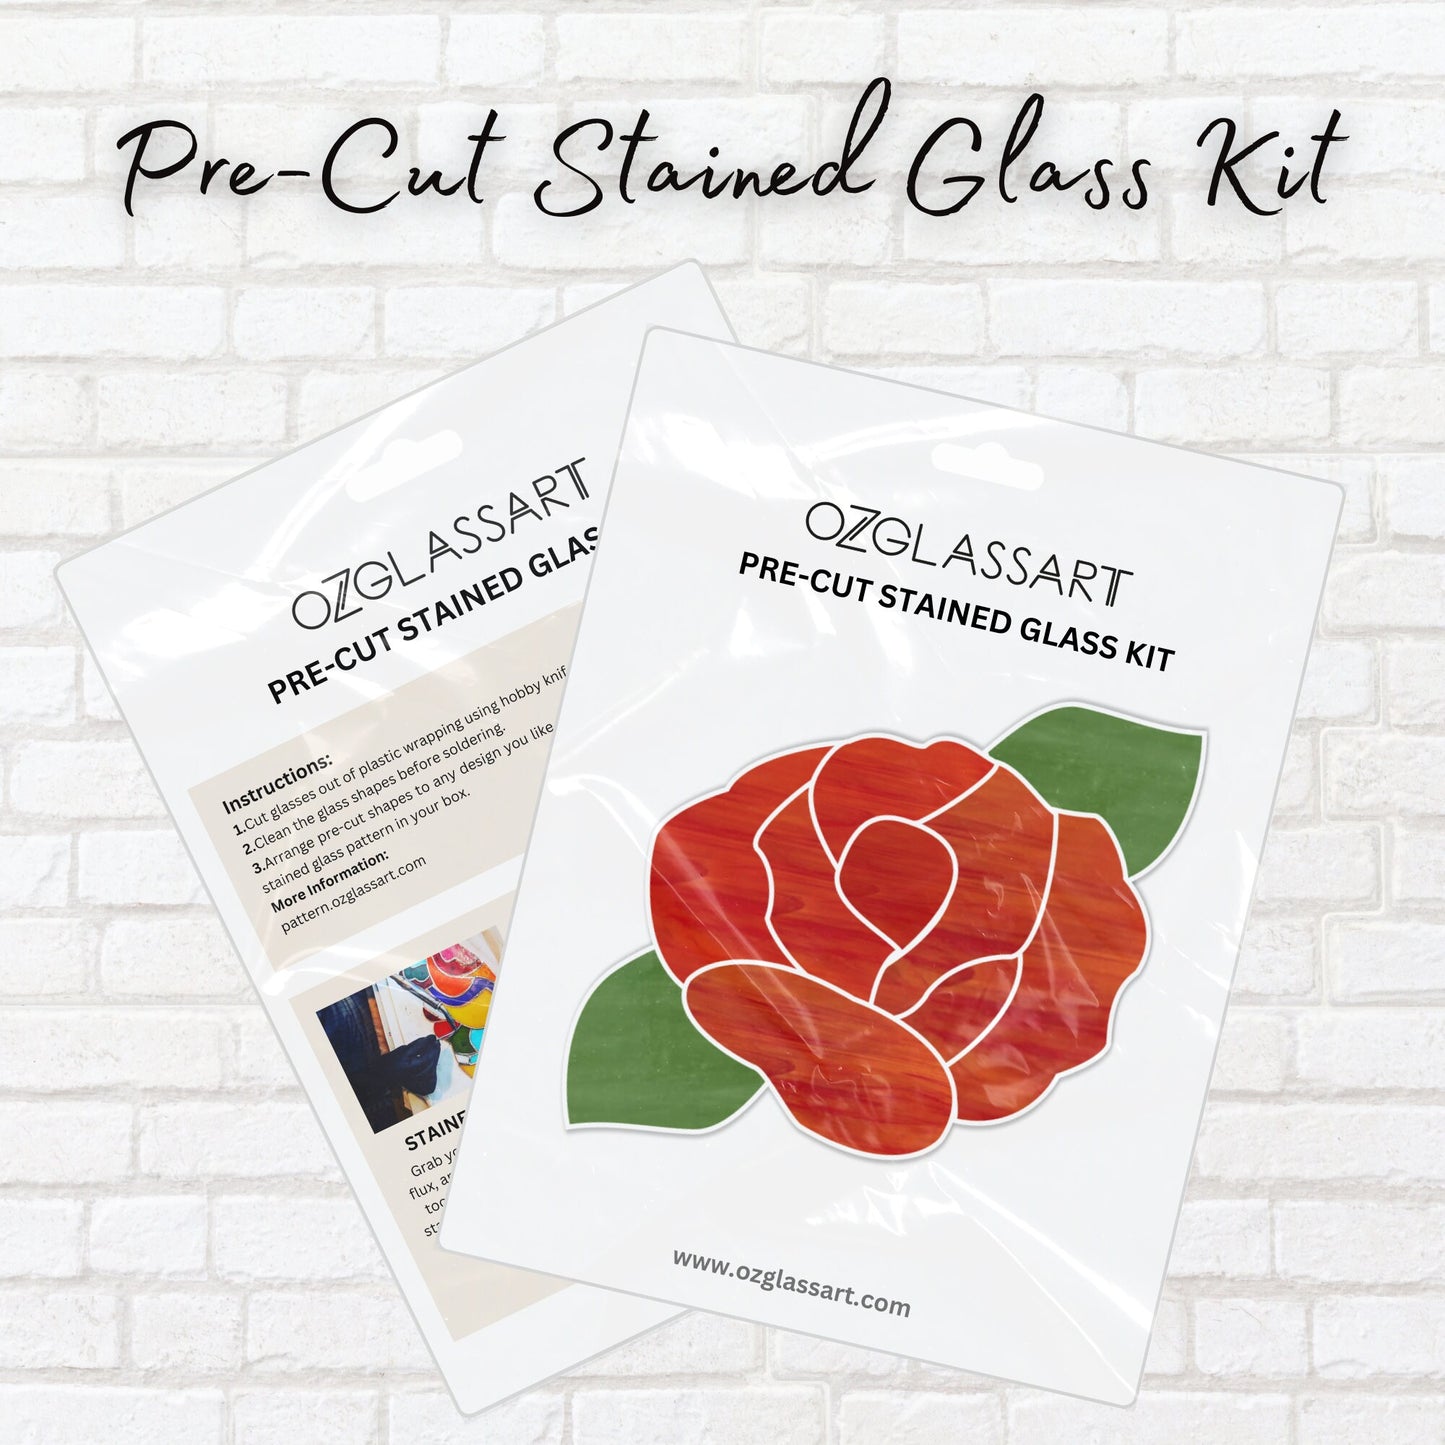 Precut Rose Stained Glass Kit - Stained Glass Red Rose Pre-Cut Kit - DIY Glass Kit